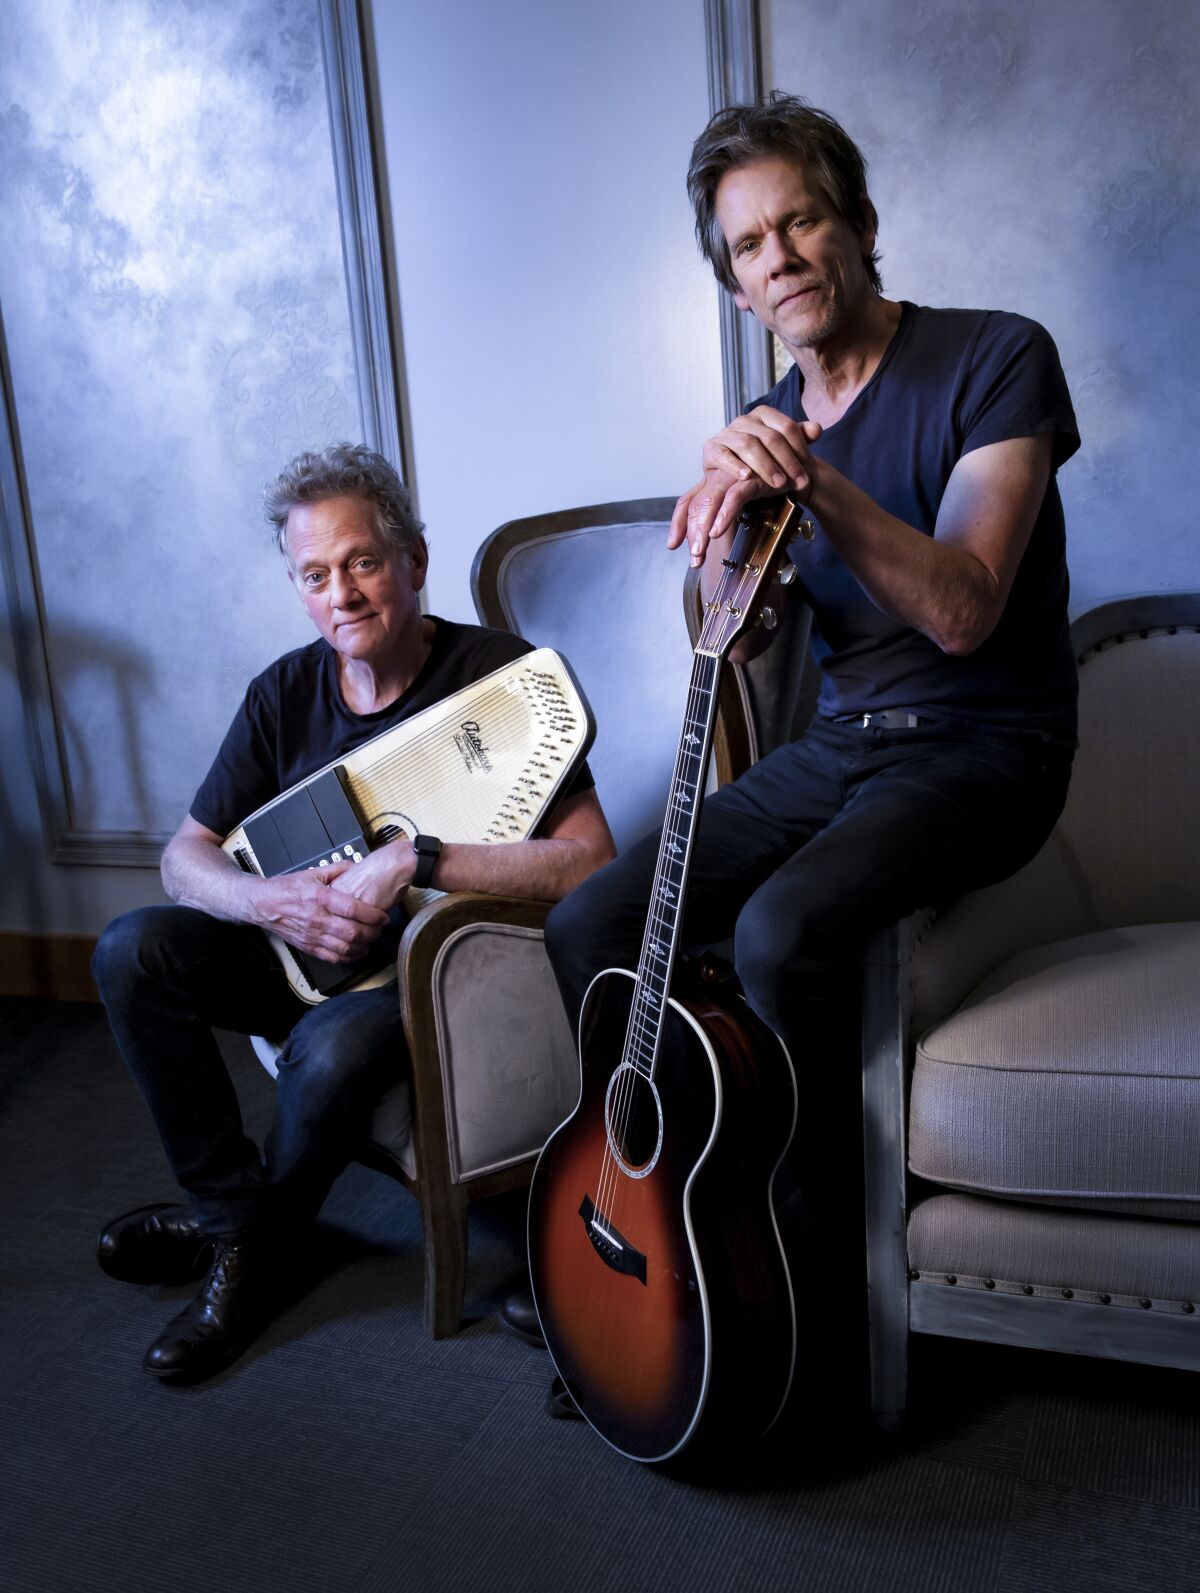 Kevin Bacon (right) and his brother, Michael, have been making music together as the Bacon Brothers since 1995.